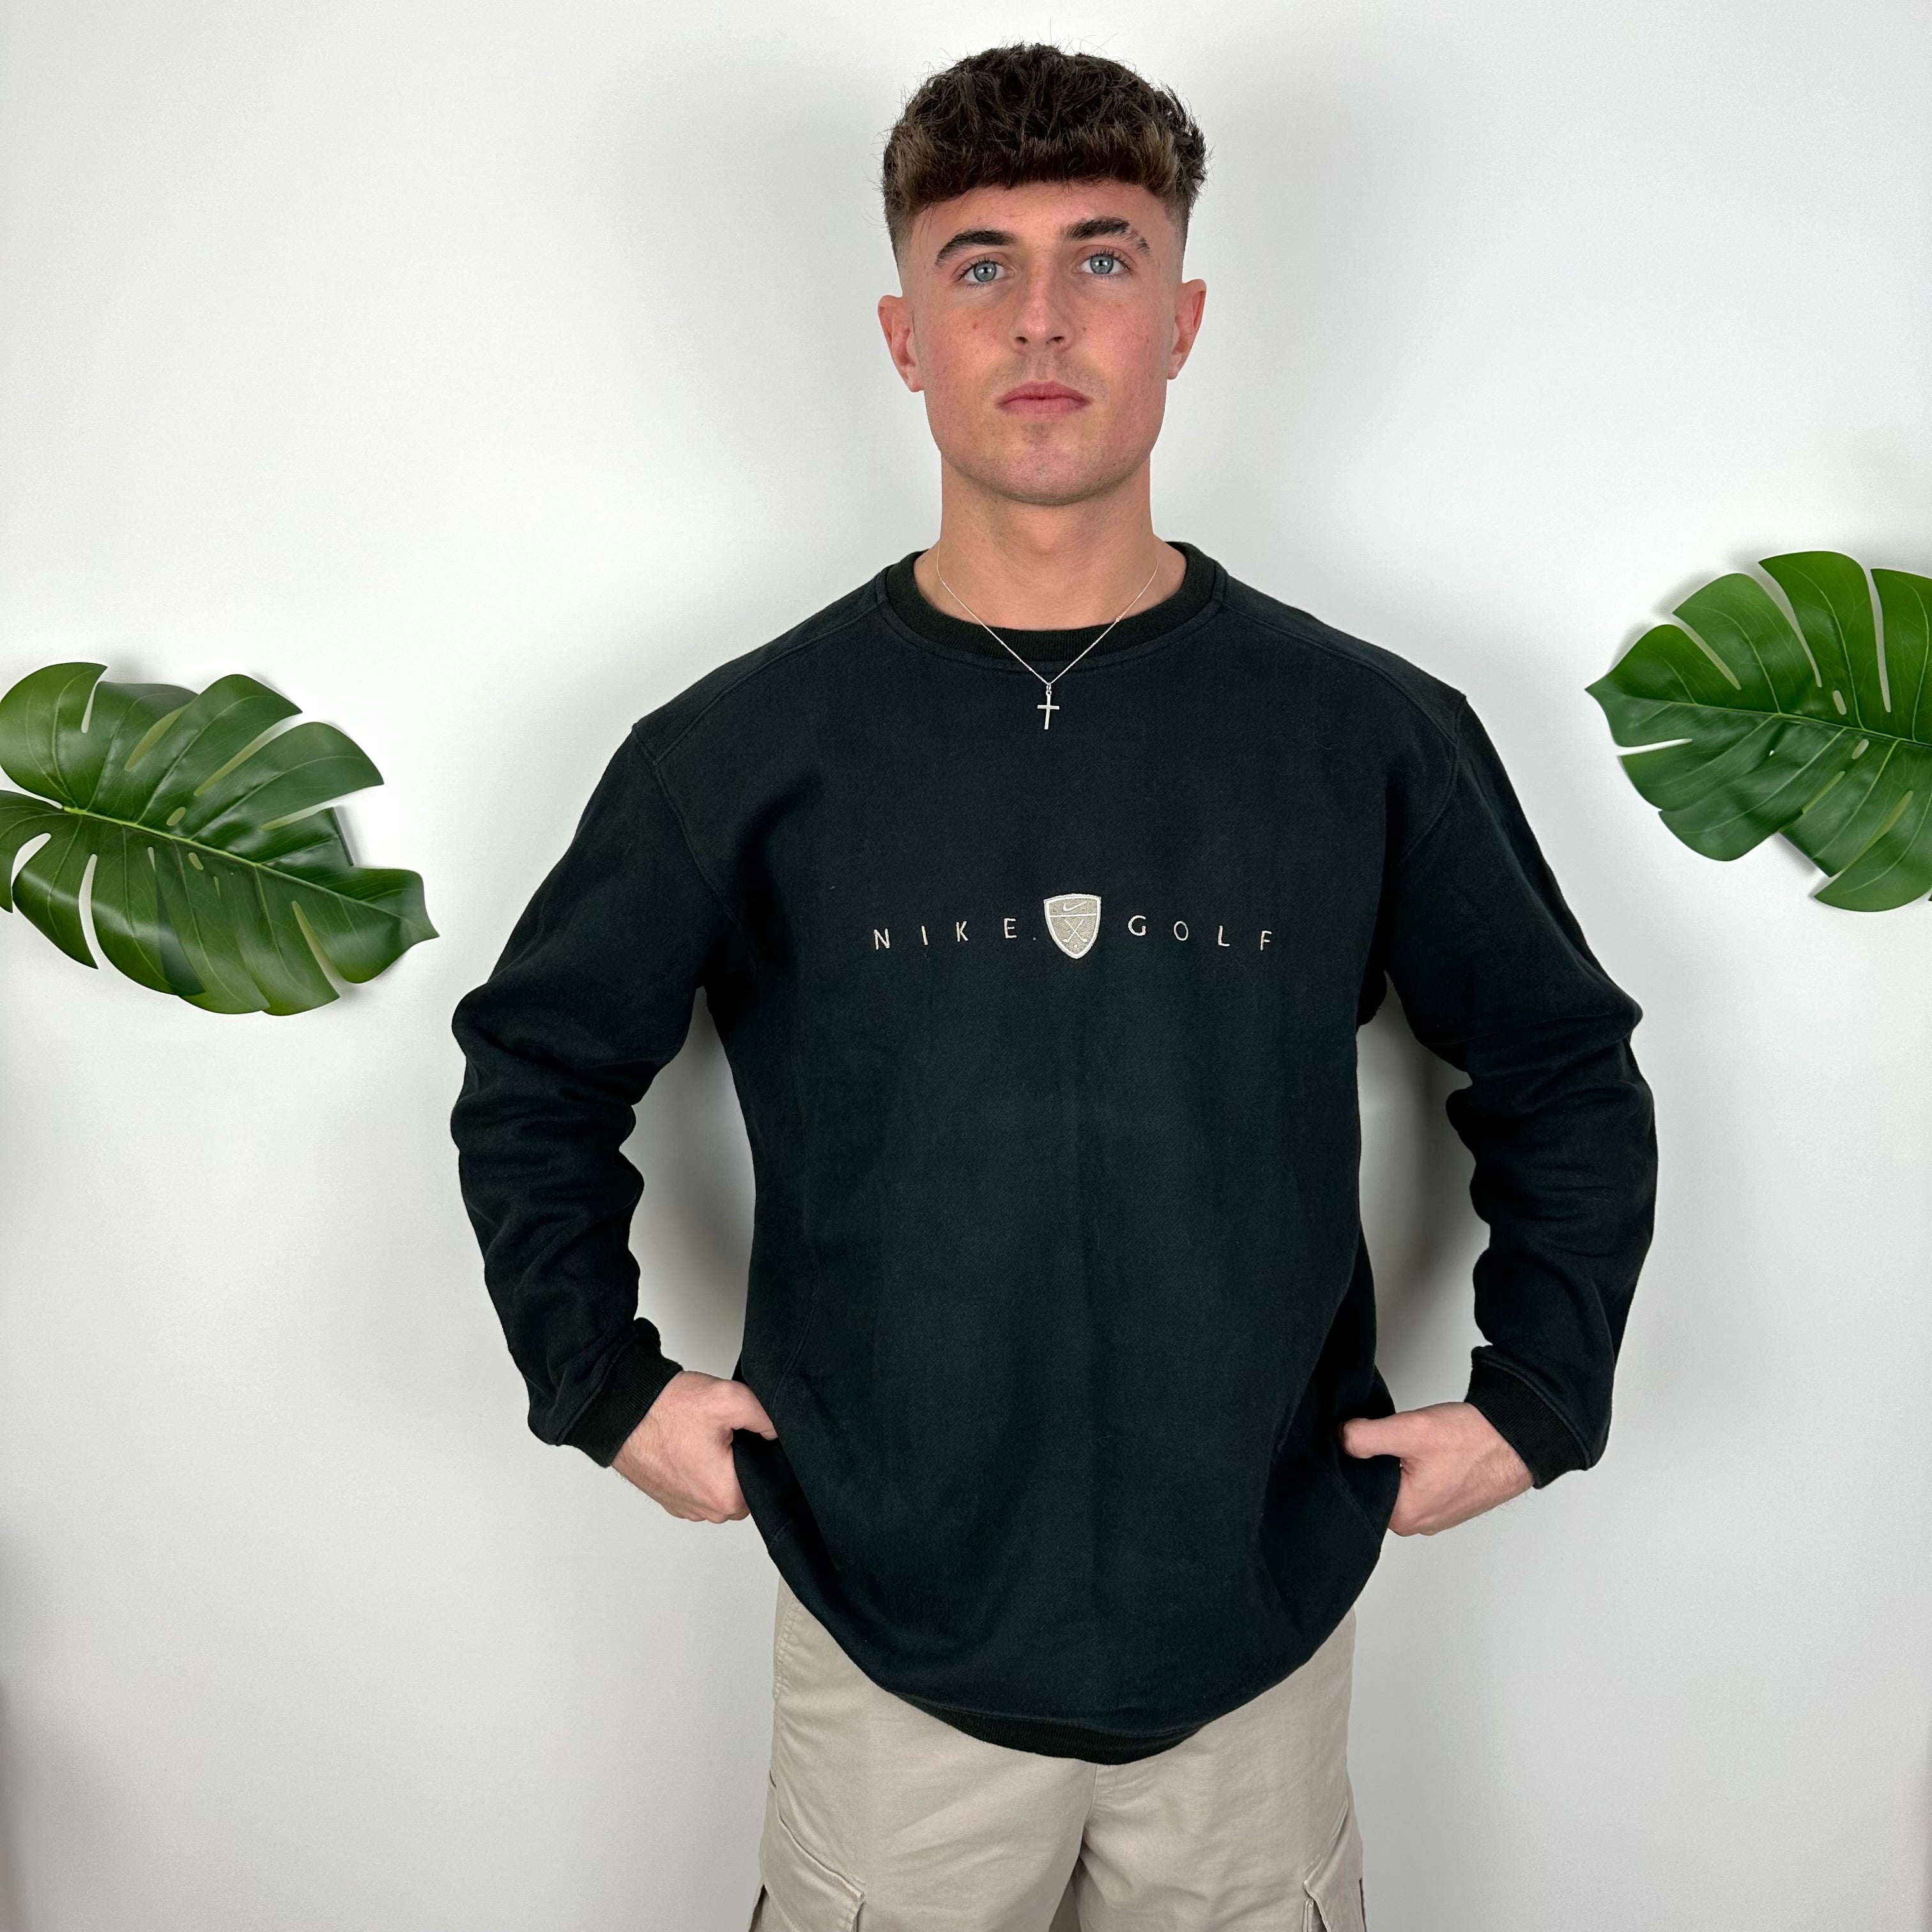 Nike Golf Black Embroidered Spell Out Sweatshirt (L)